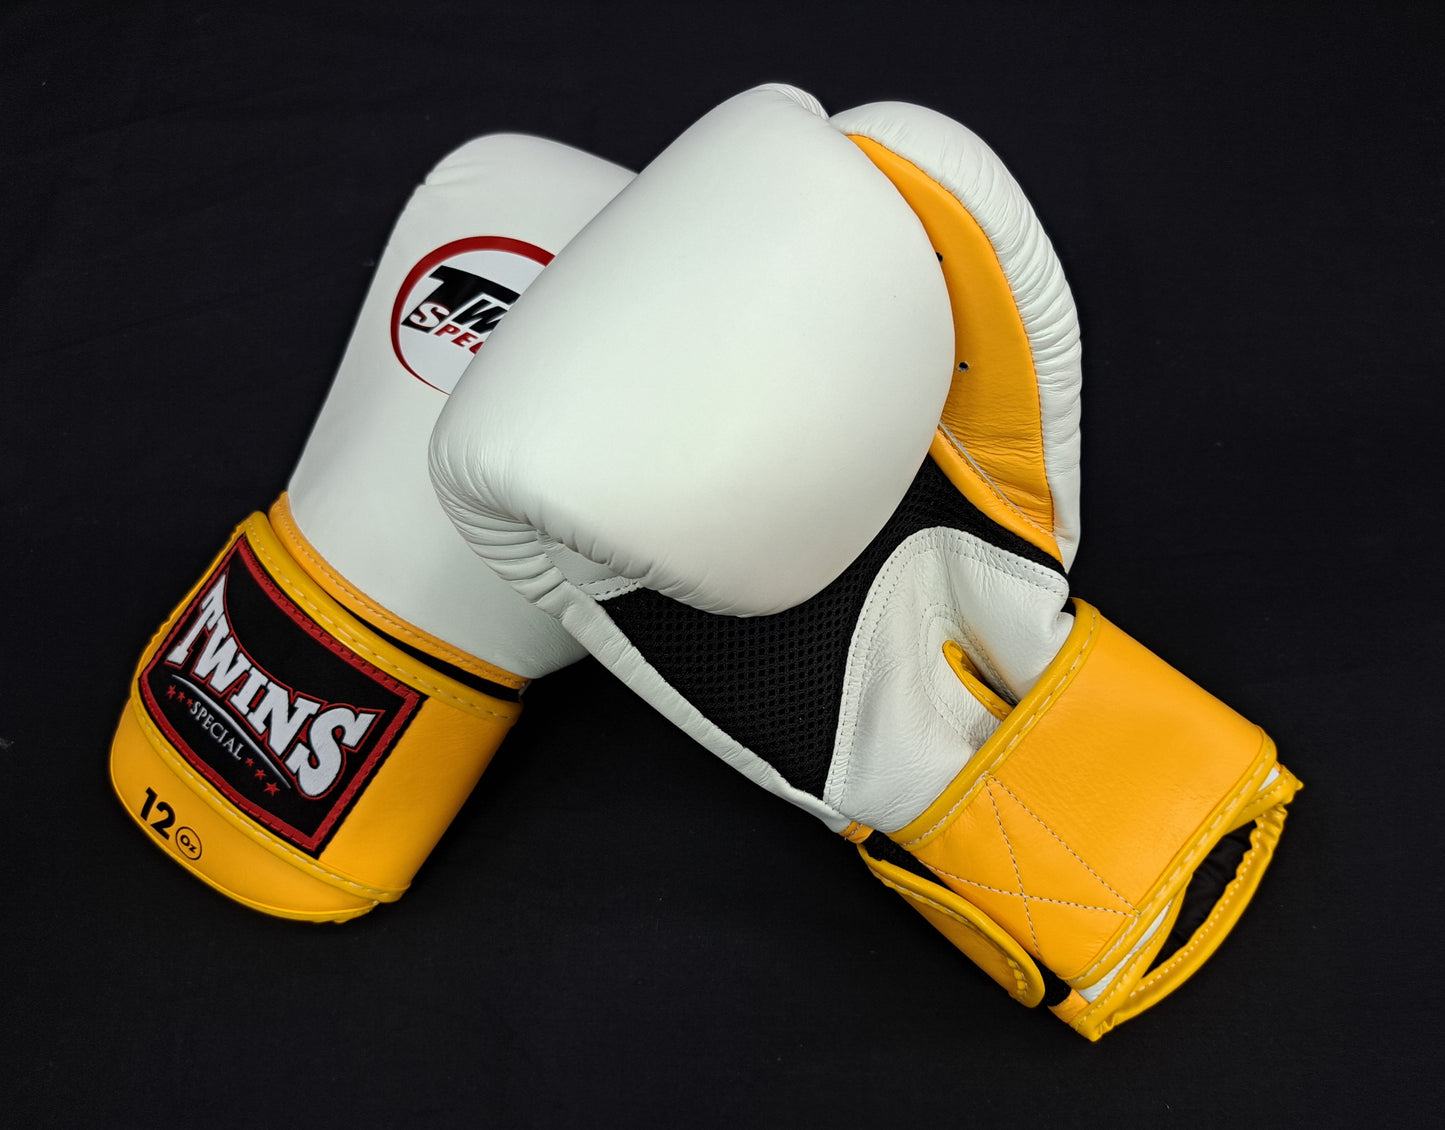 Twins Special "King"style thai boxing gloves